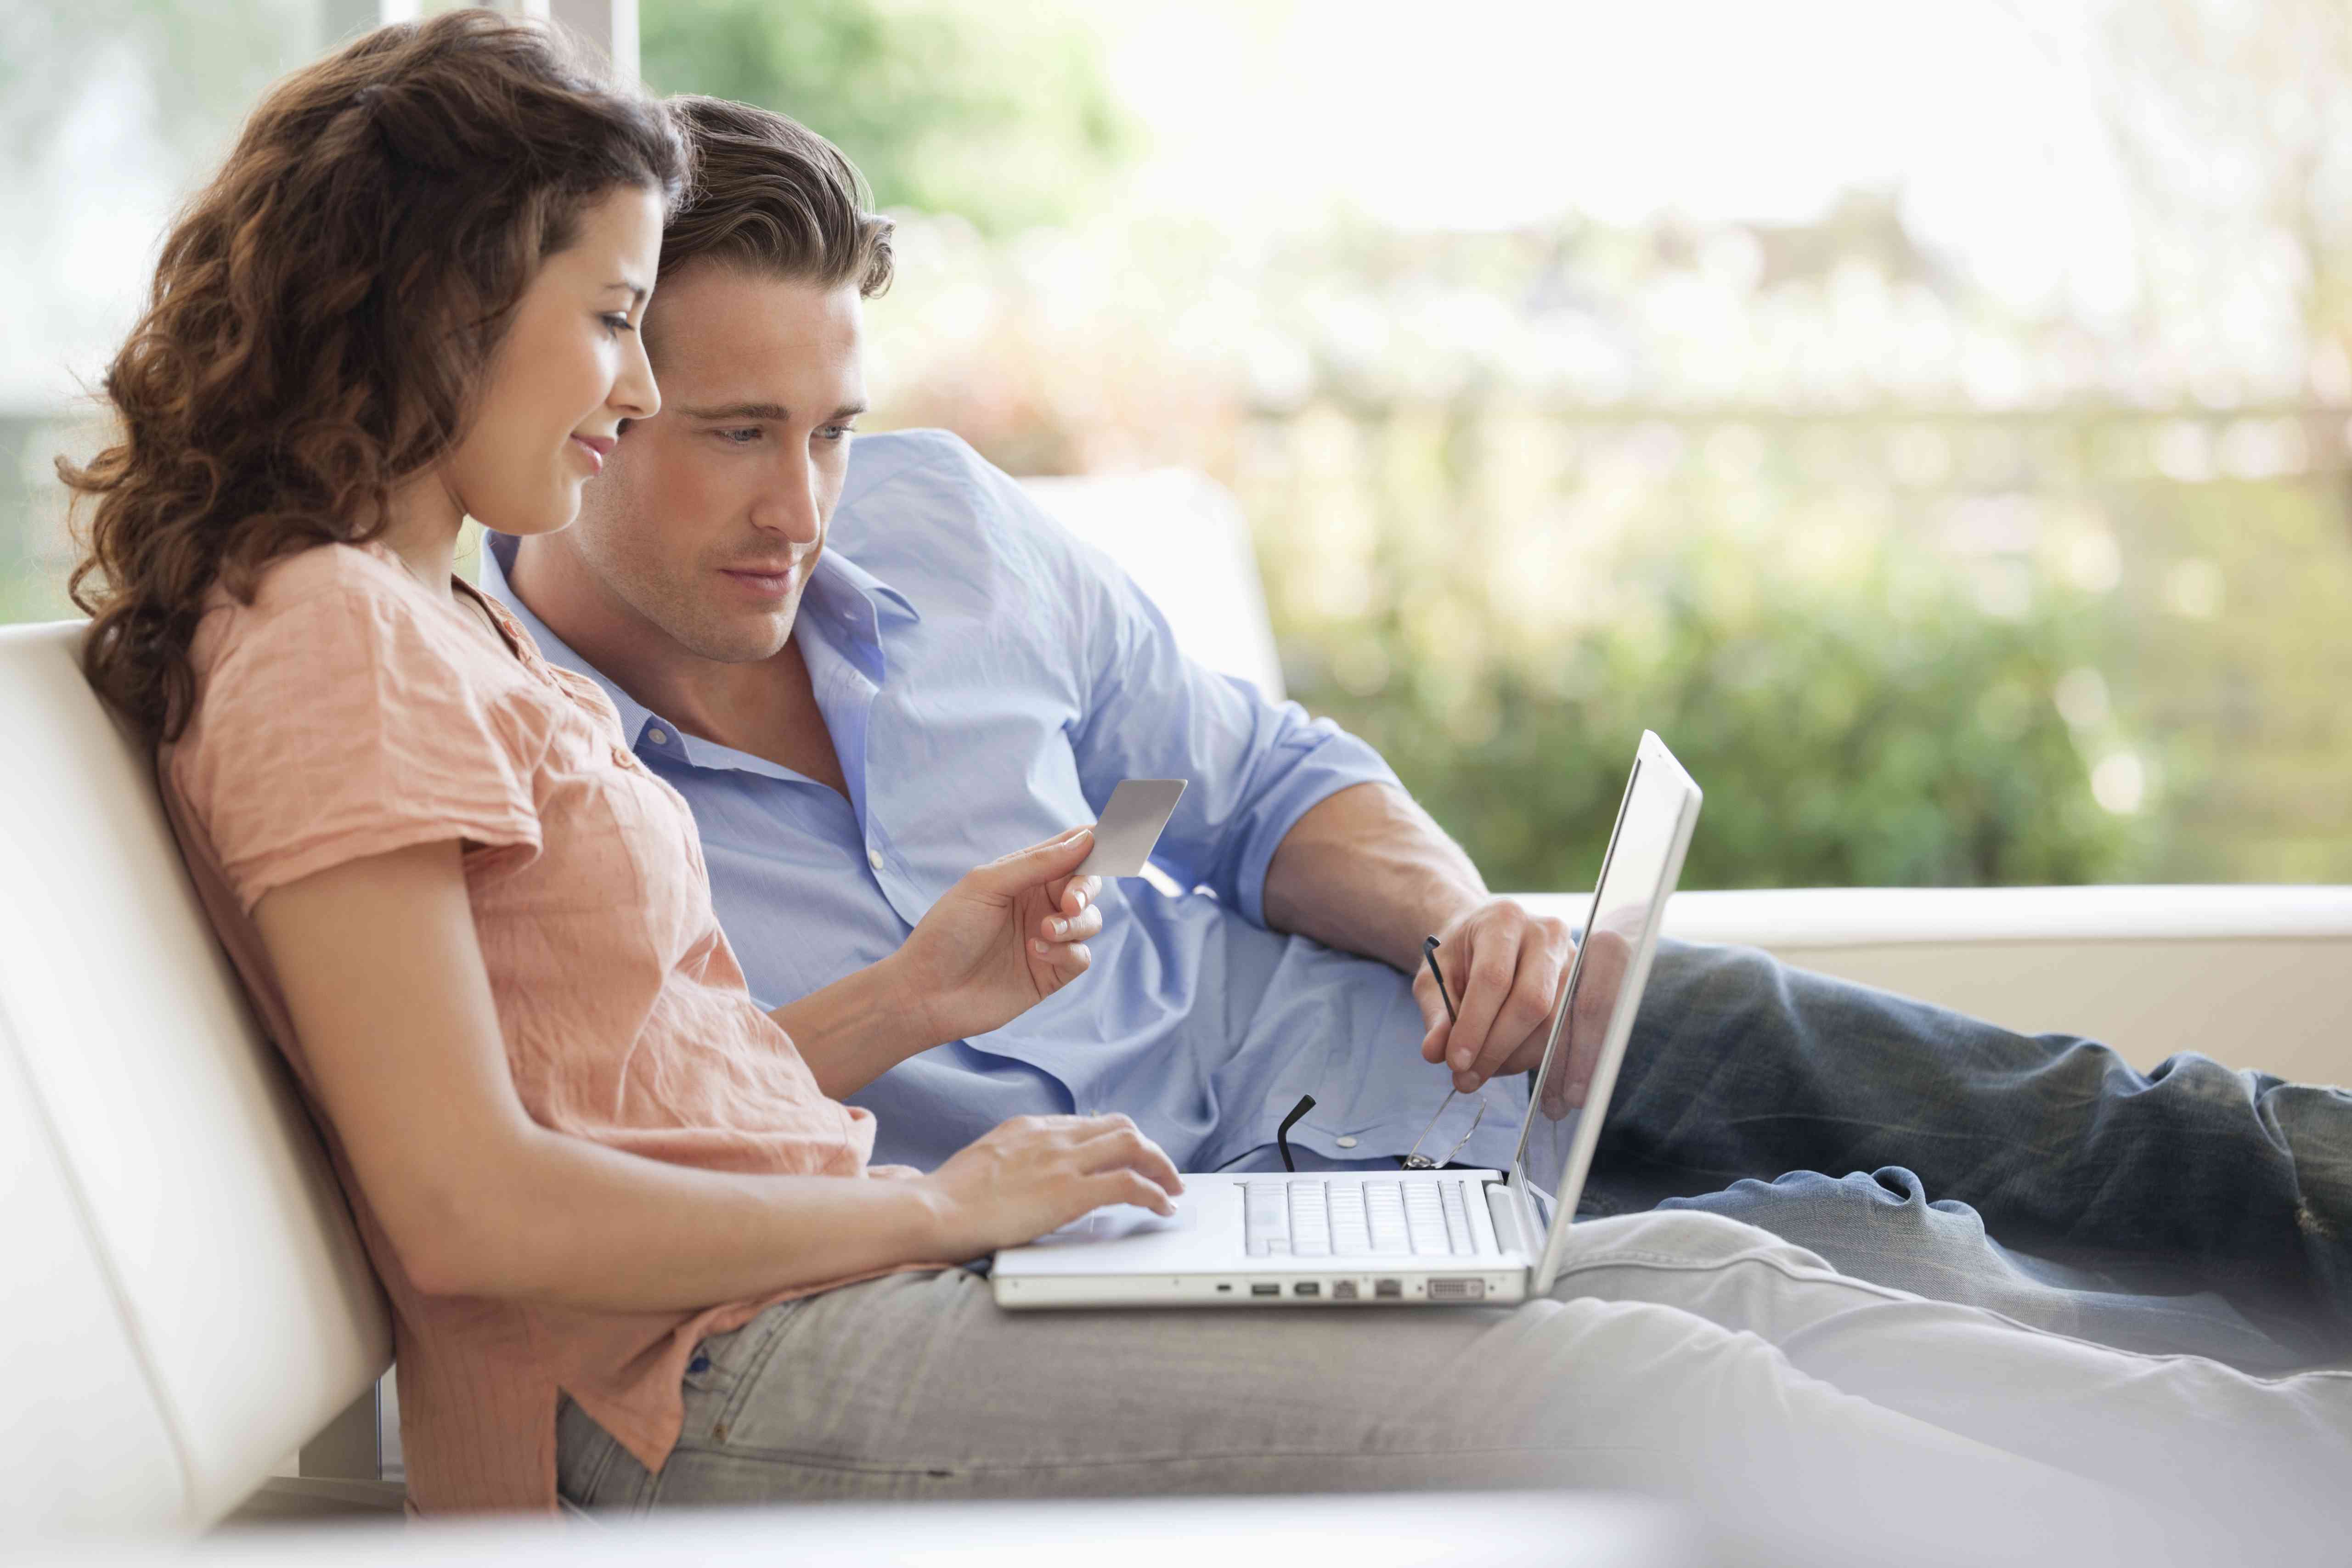 A man and a woman sit on a couch with a laptop paying for something with a credit card